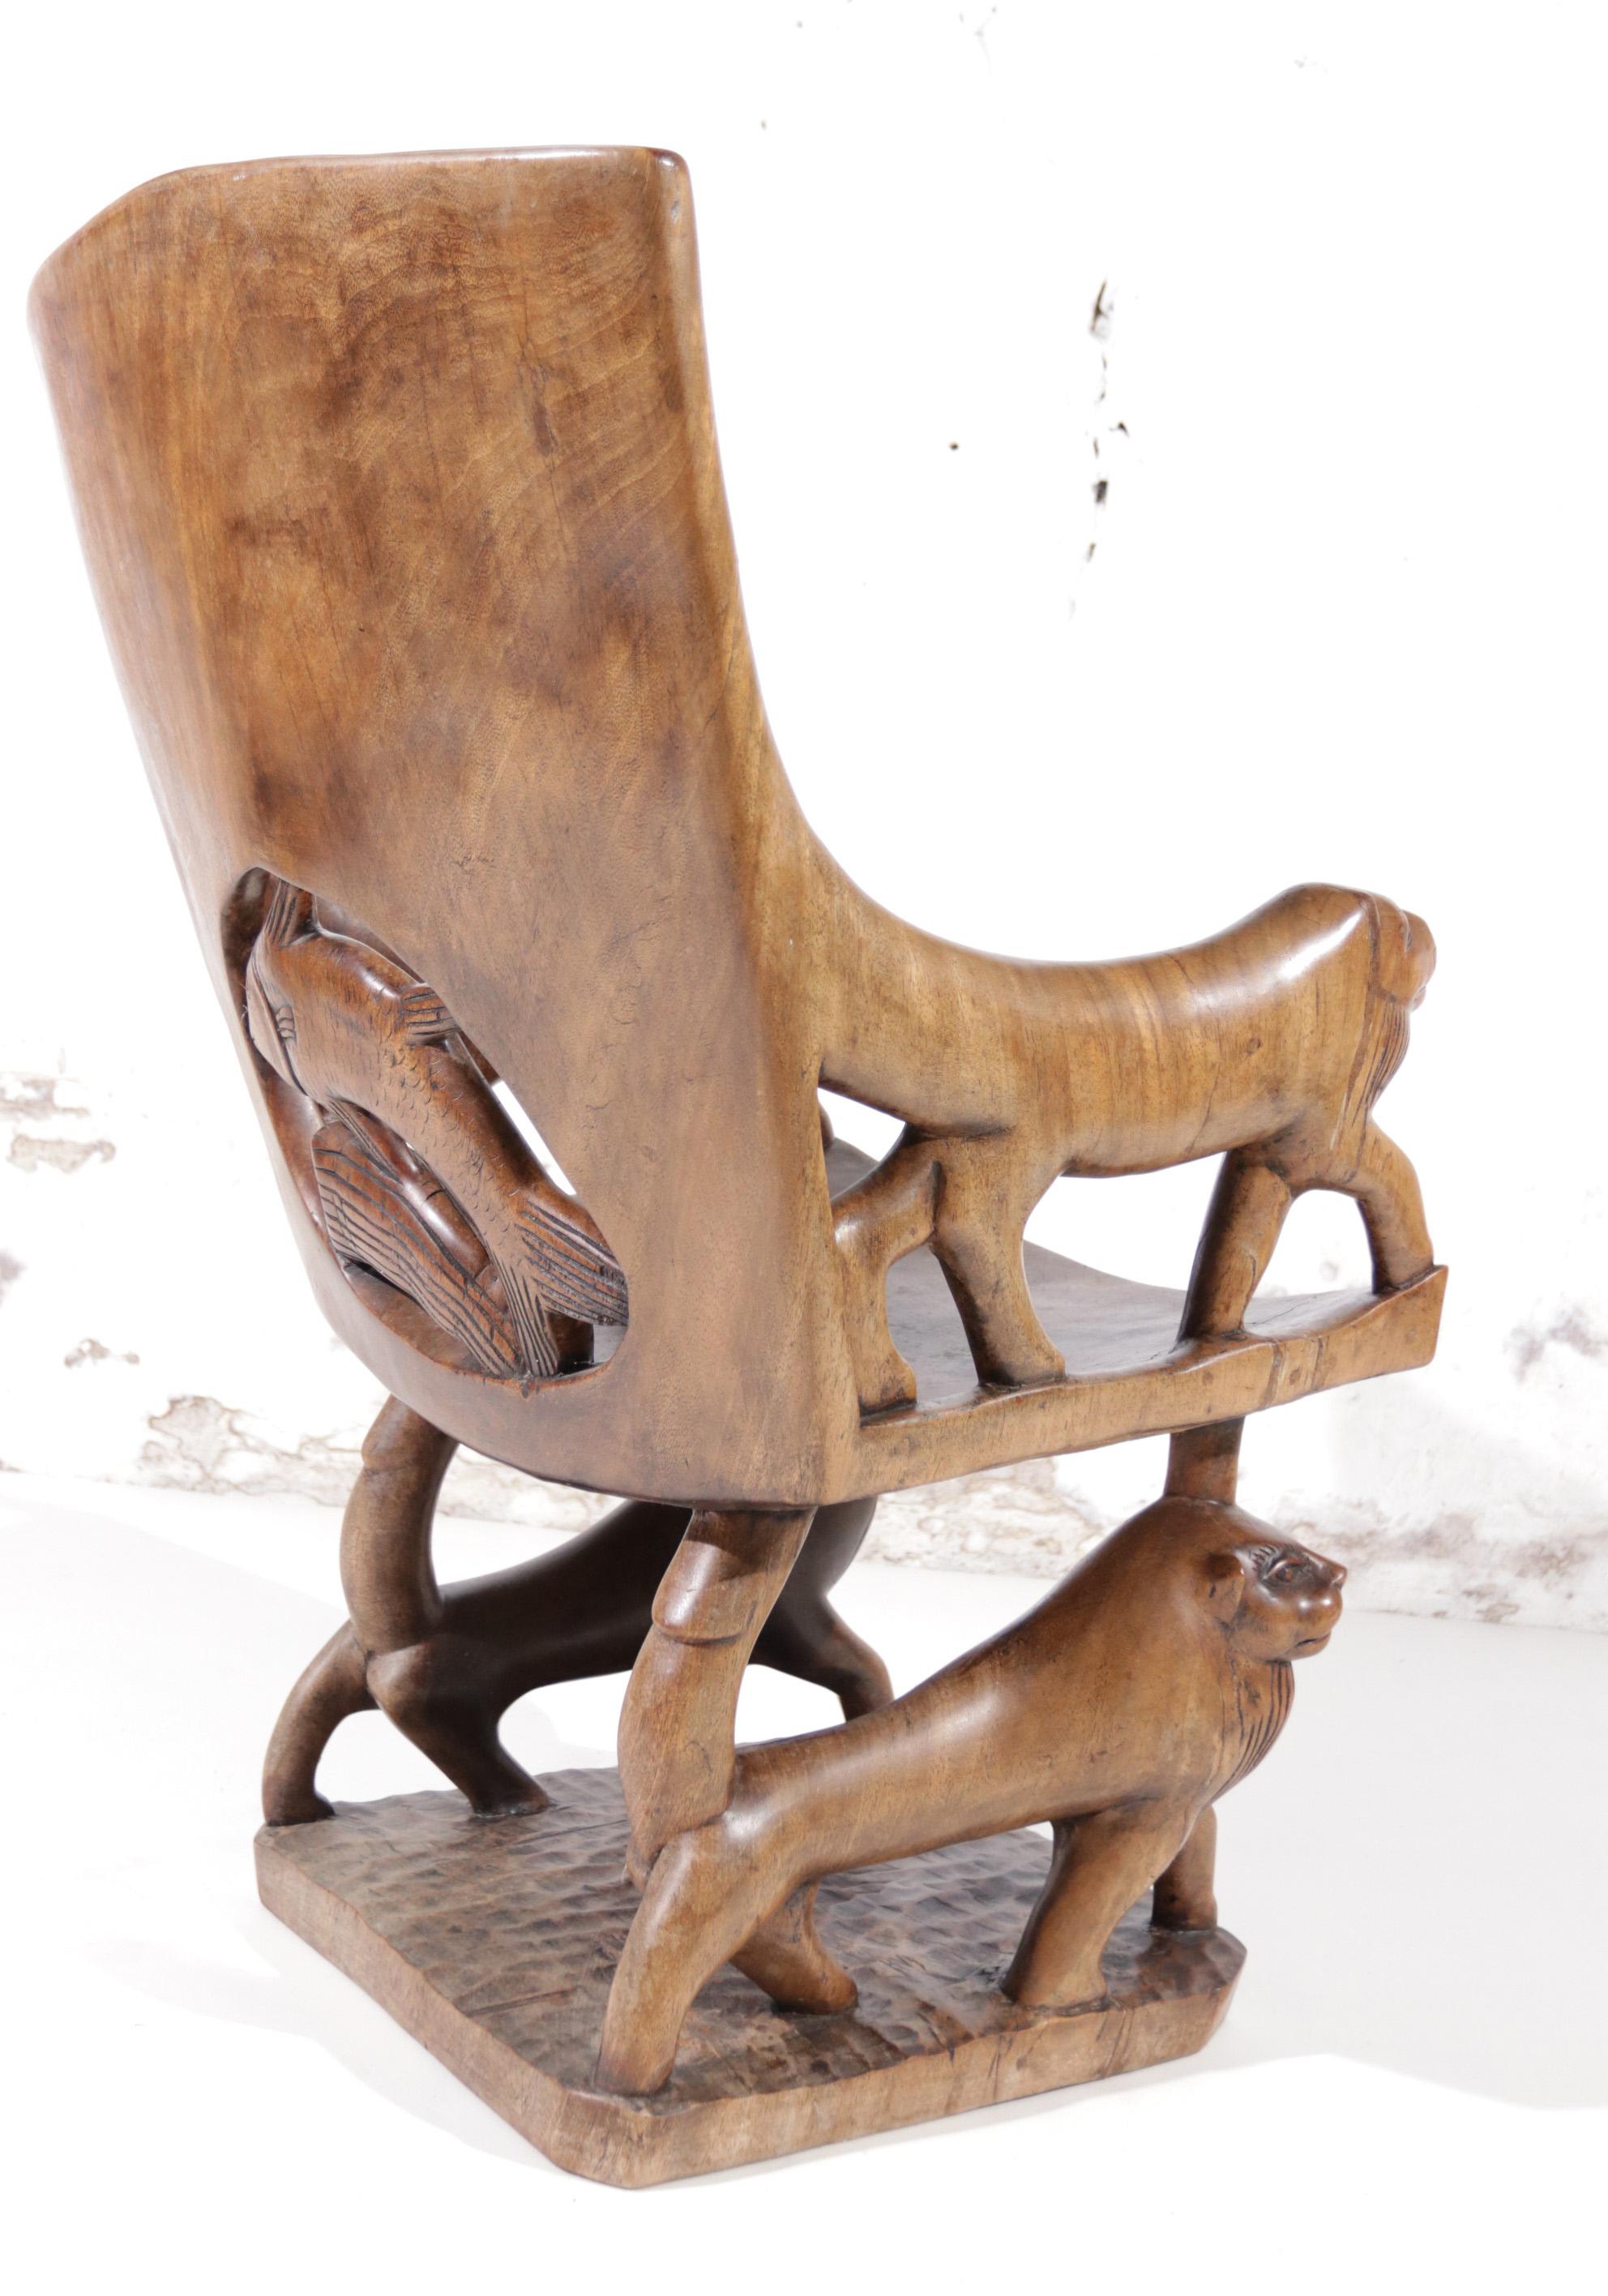 Exquisite African Sculptural Lion Throne 1 Piece of Solid Hand Carved Wood 4